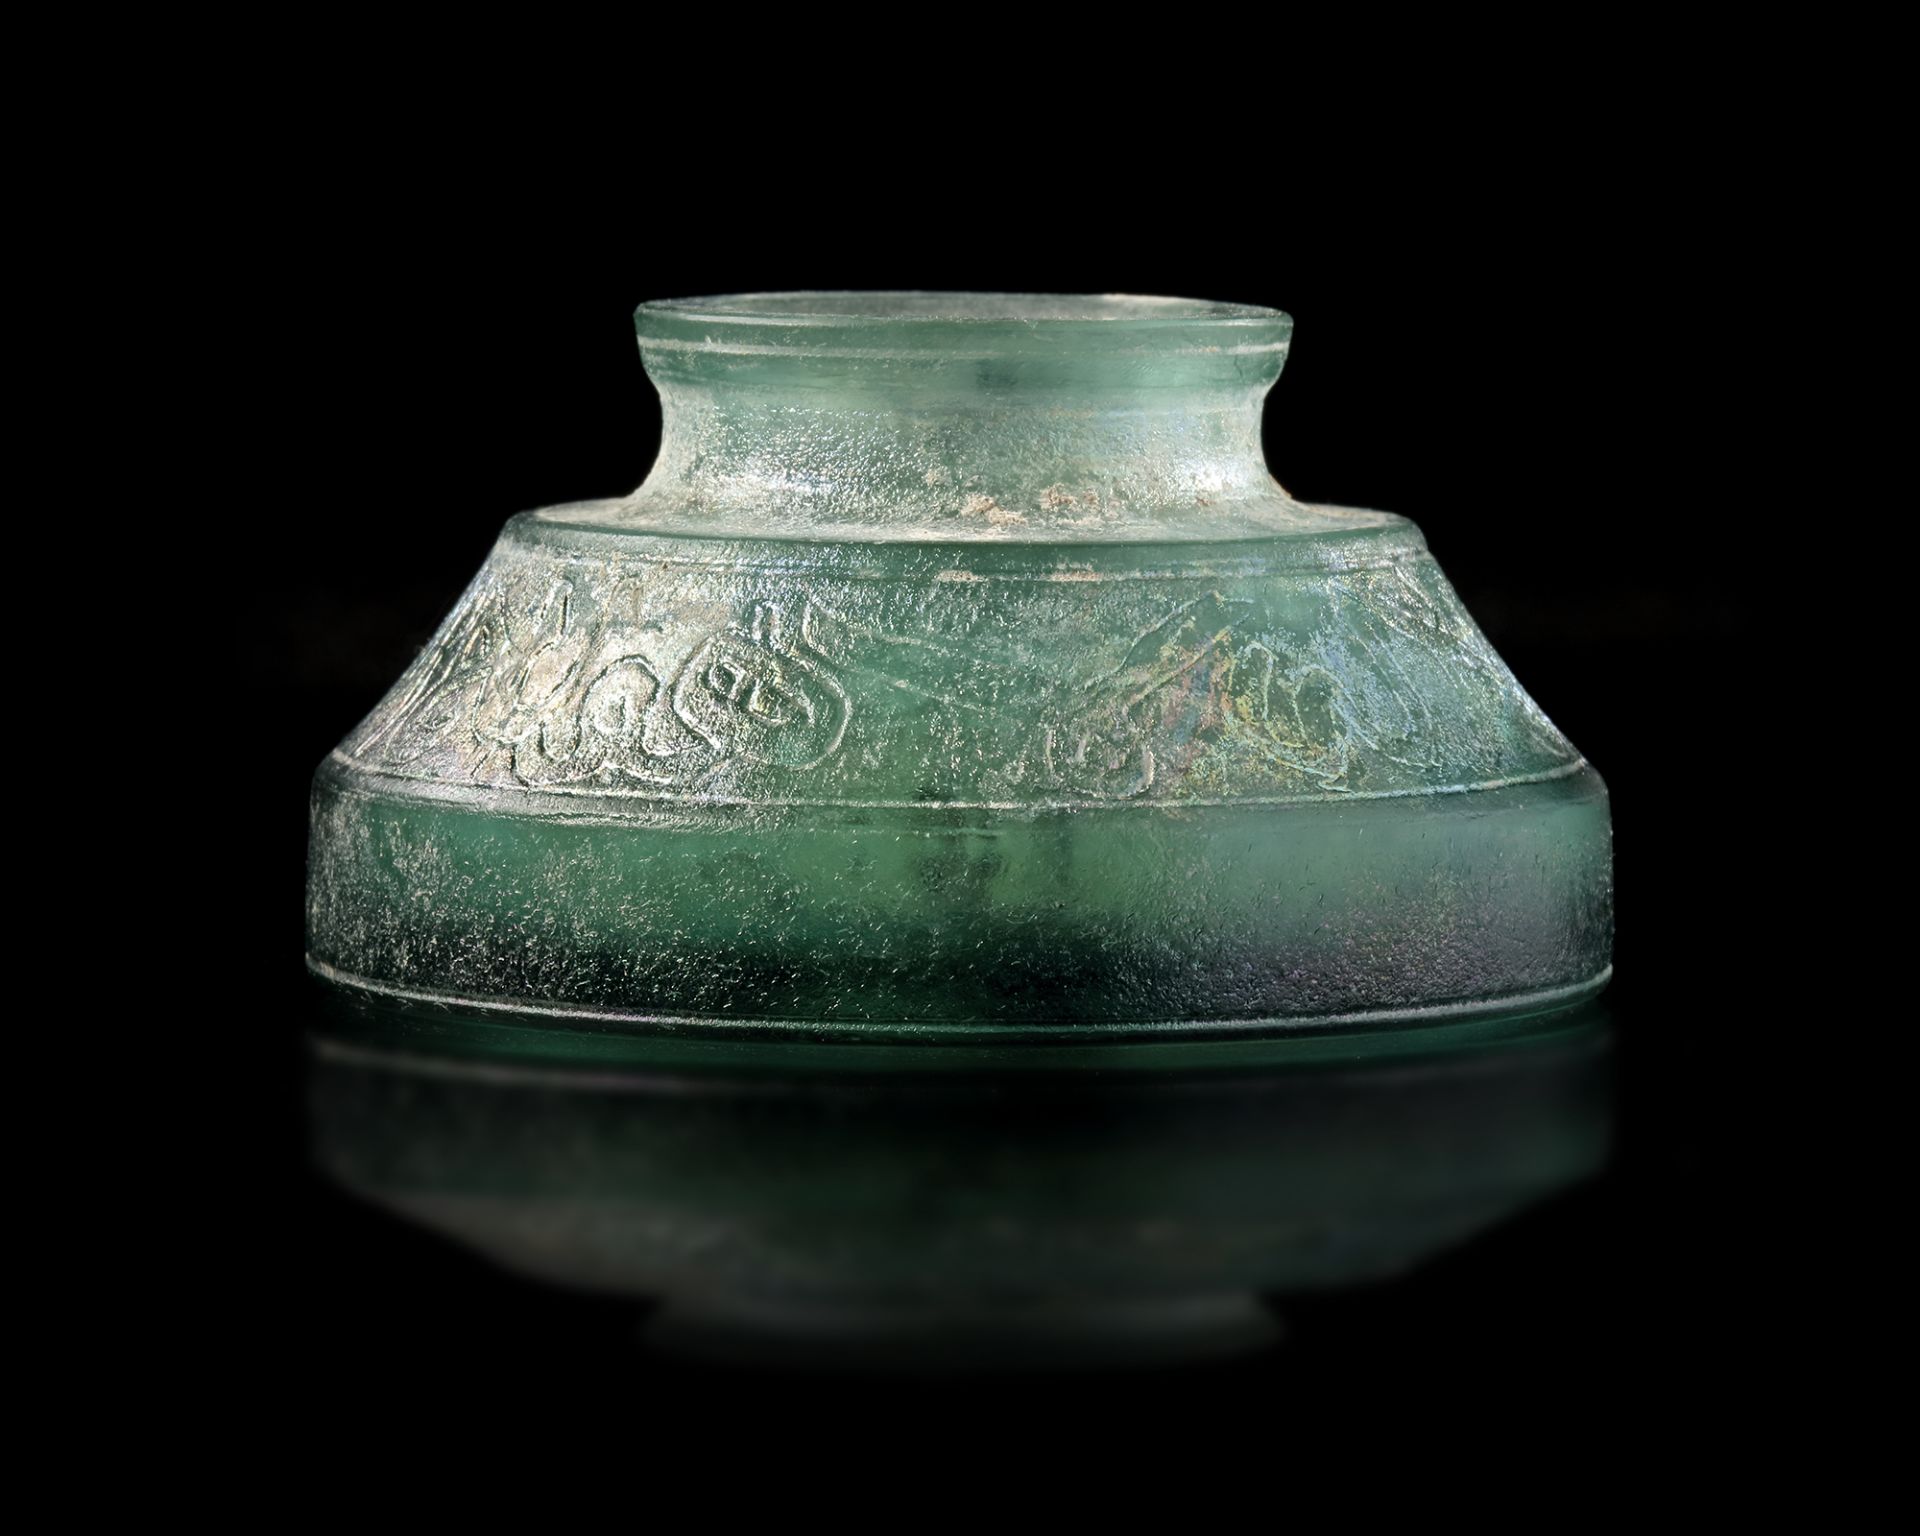 AN EARLY ISLAMIC GLASS INKWELL, PERSIA, 12TH-13TH CENTURY - Image 3 of 6